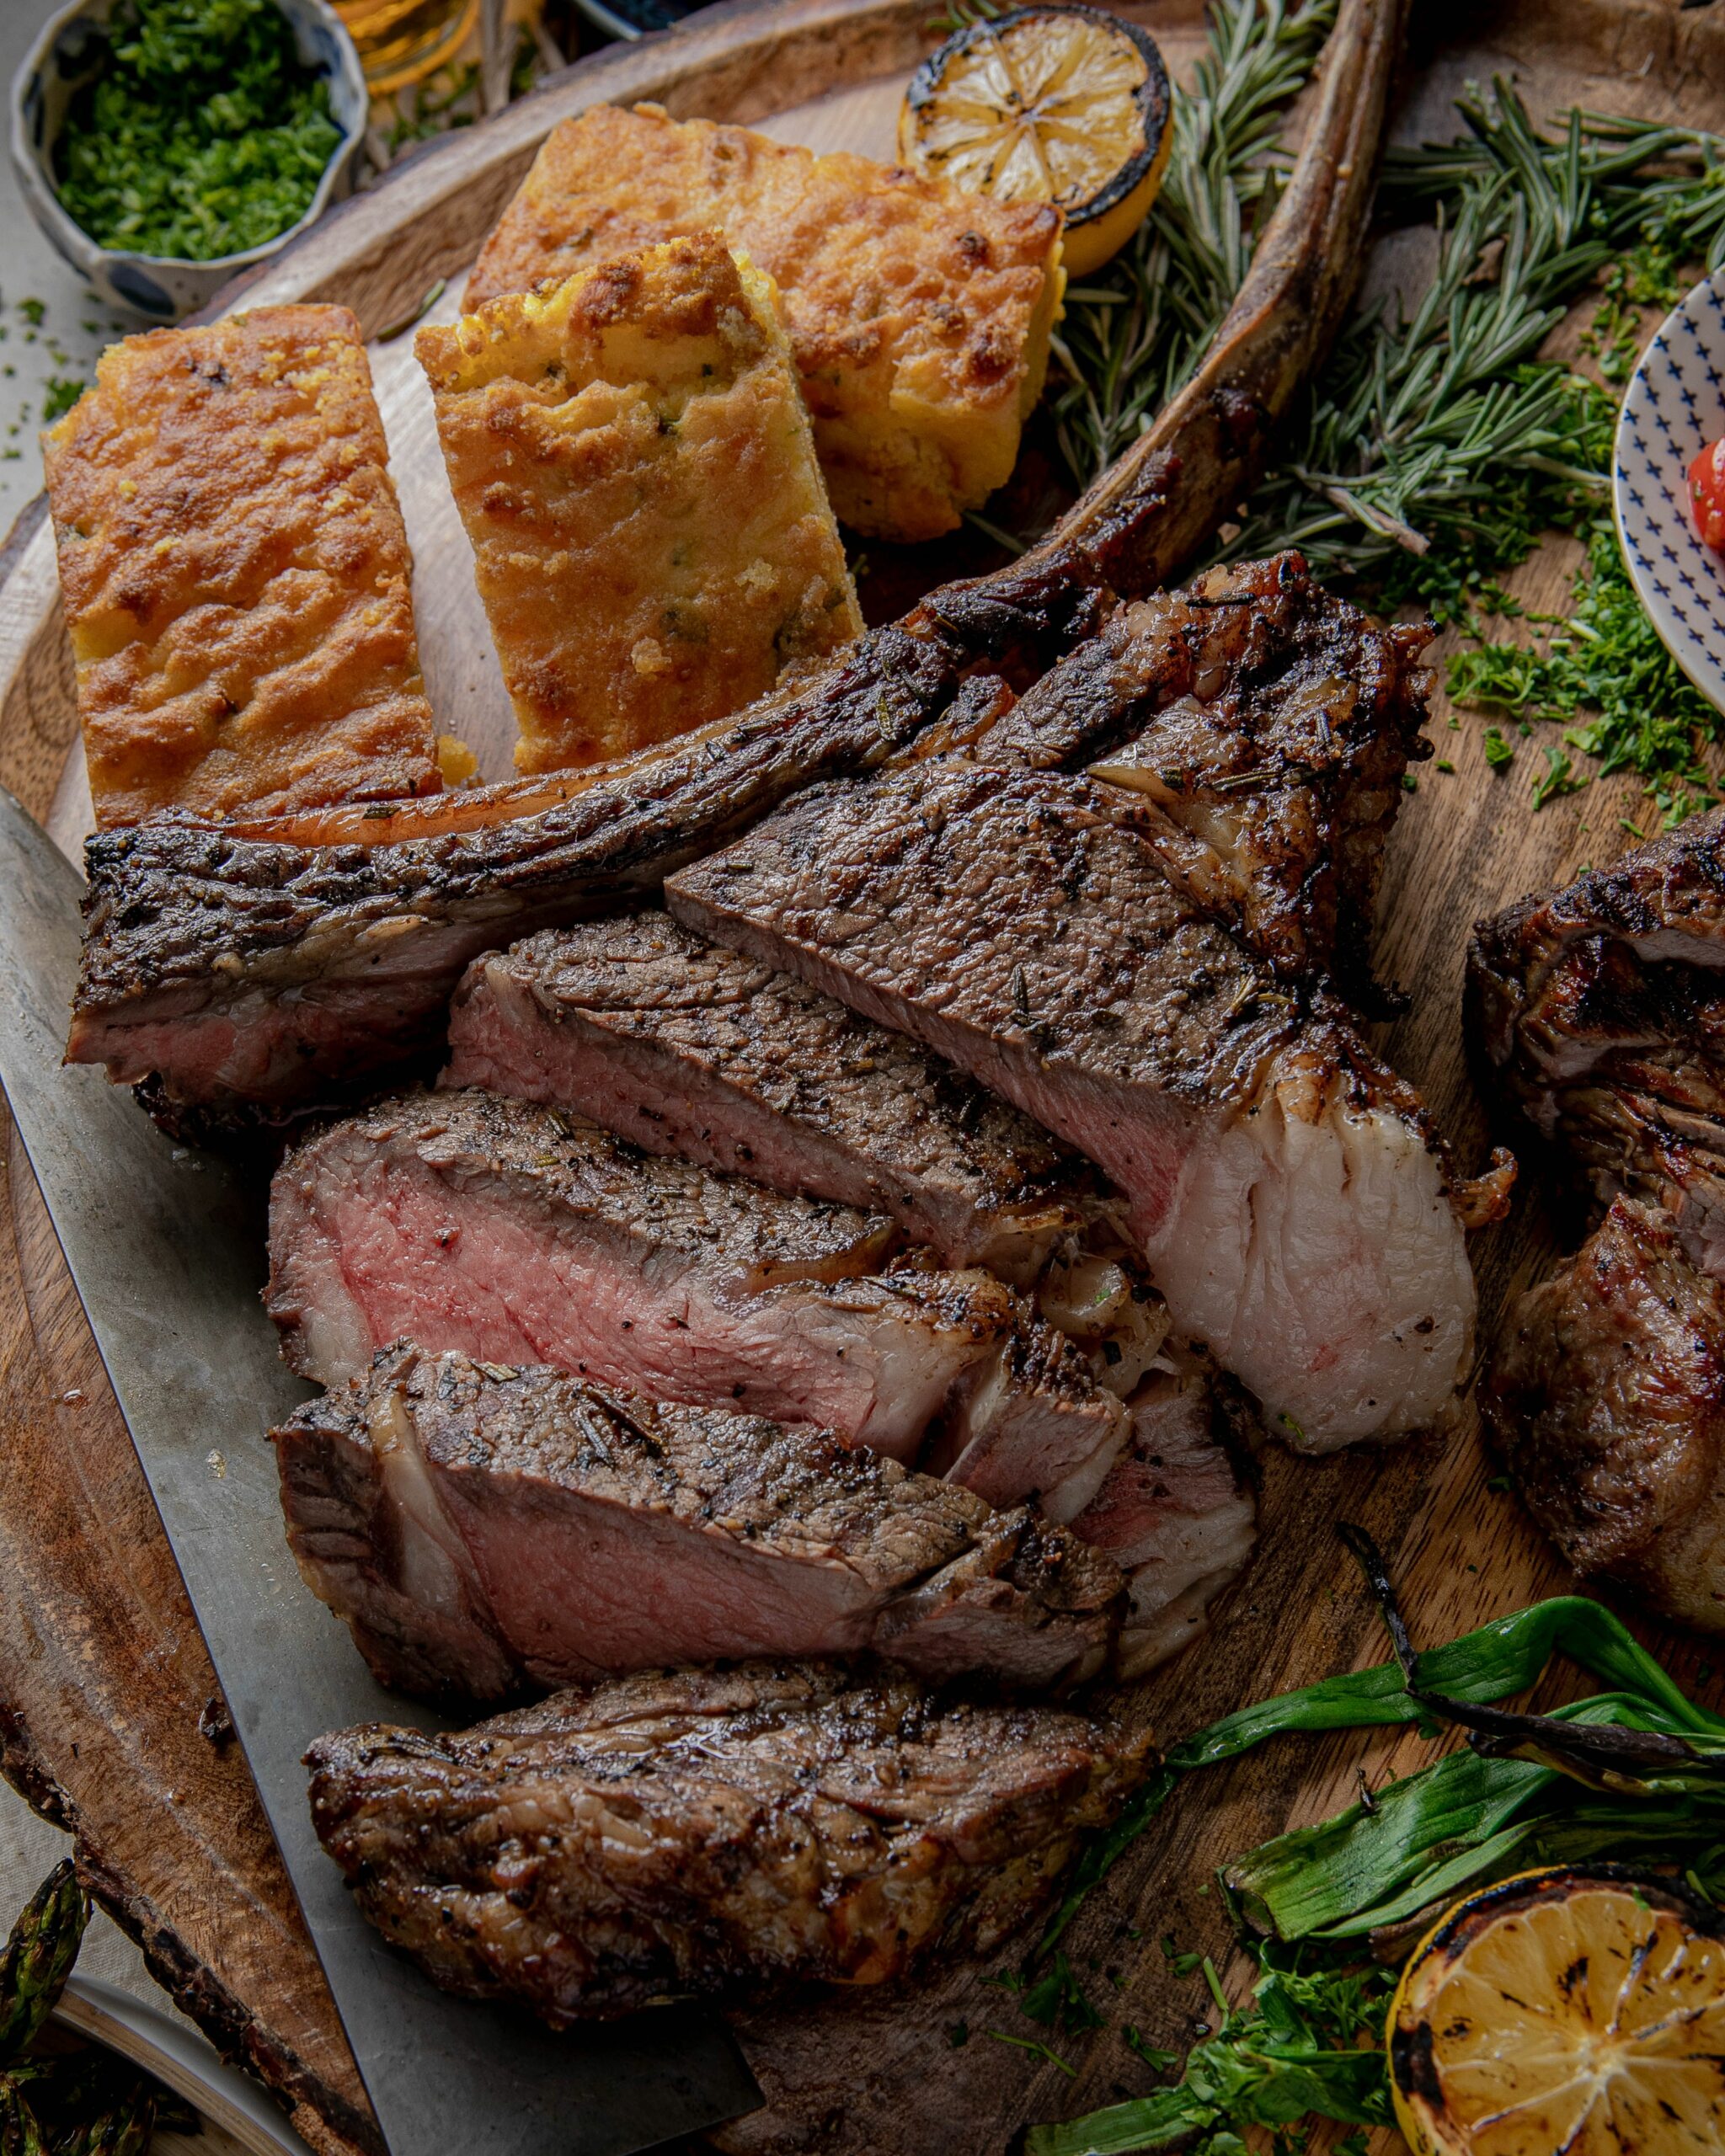 a medium rare tomahawk steak cut into several pieces and placed on a board with corn bread, grilled green onions and grilled lemons